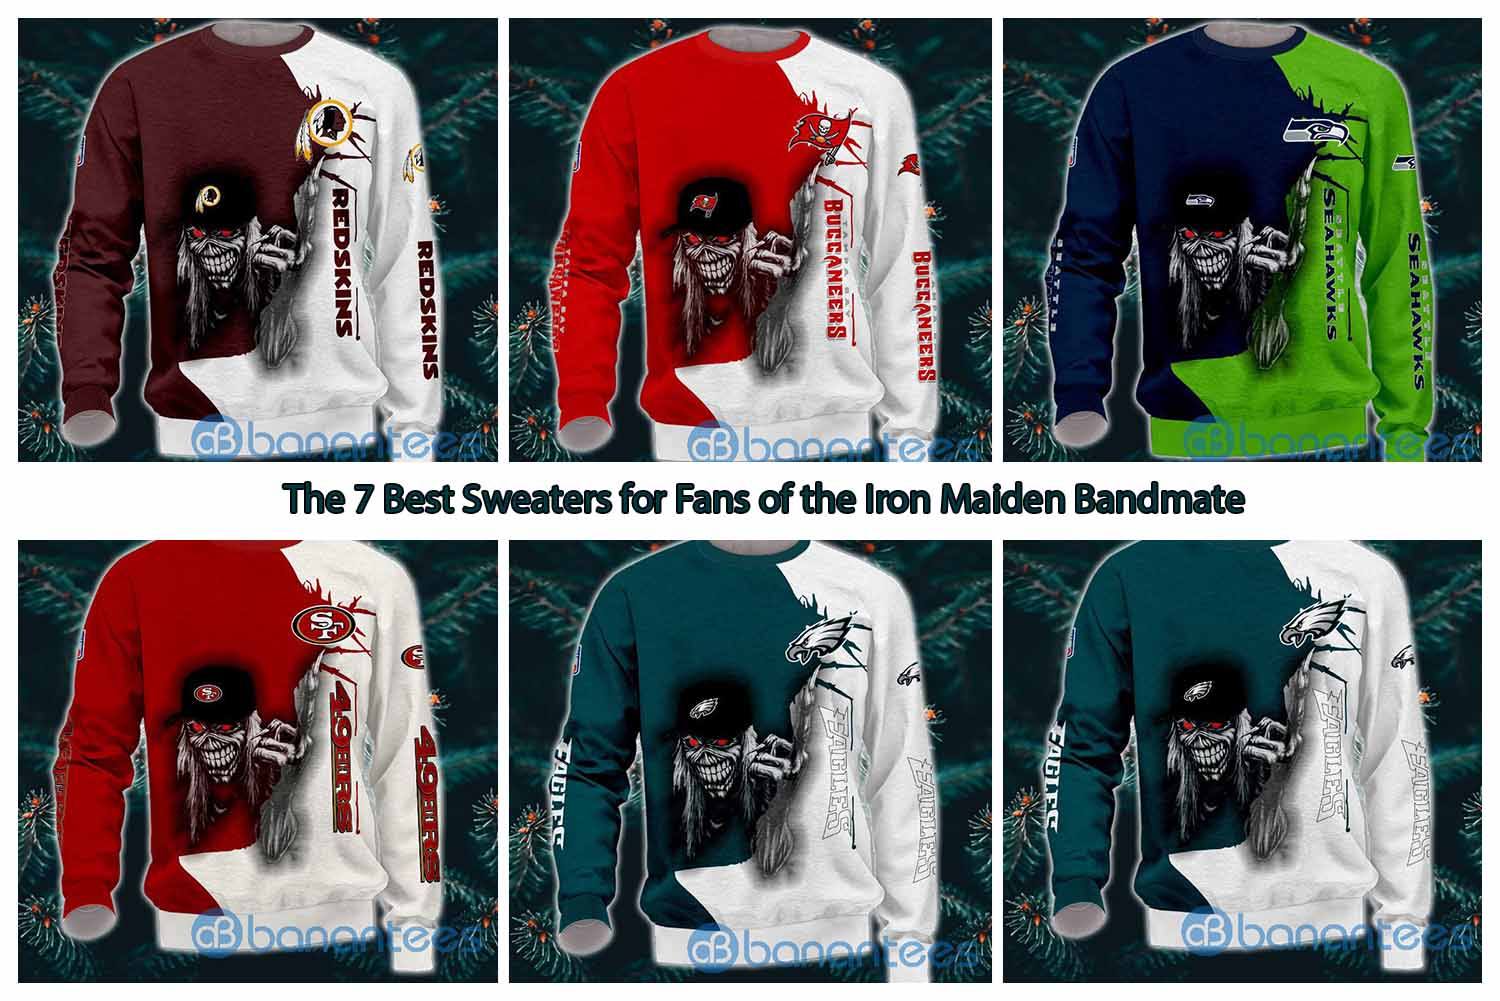 The 7 Best Sweaters for Fans of the Iron Maiden Bandmate